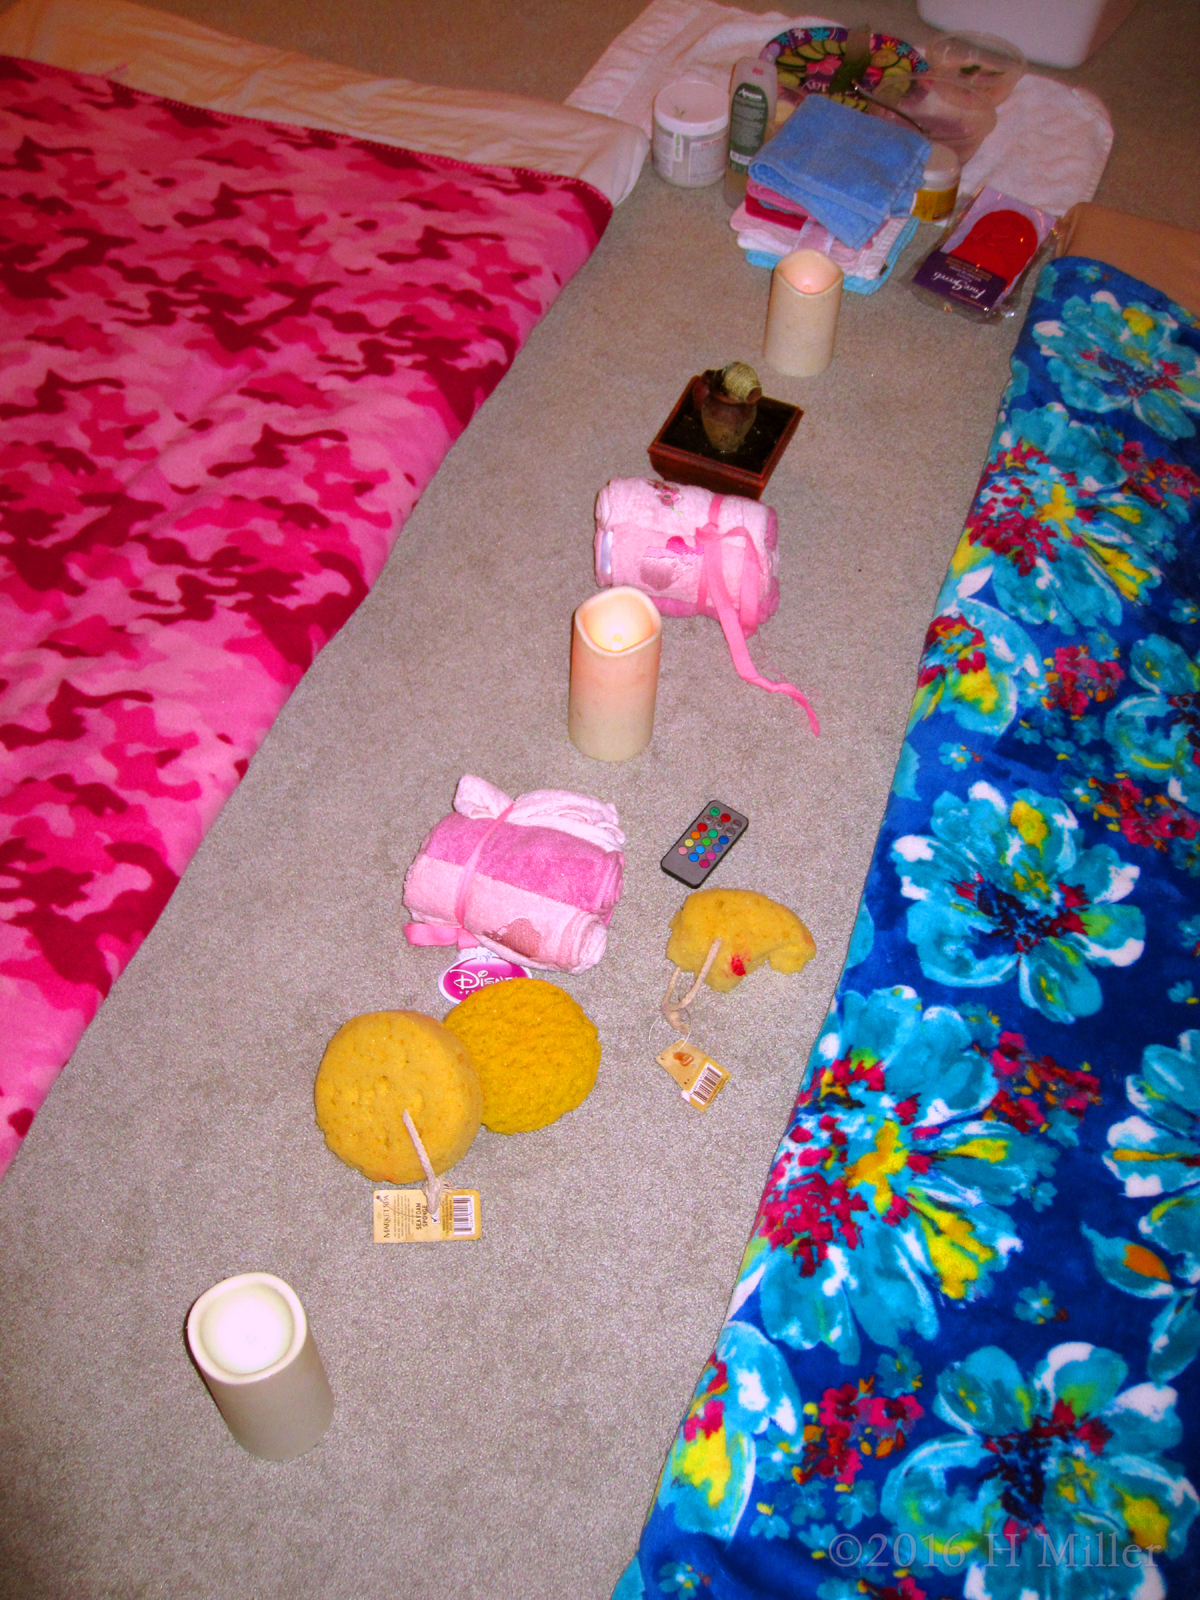 The Spa Treatment Area For Kids Facials And Massage Therapy. 